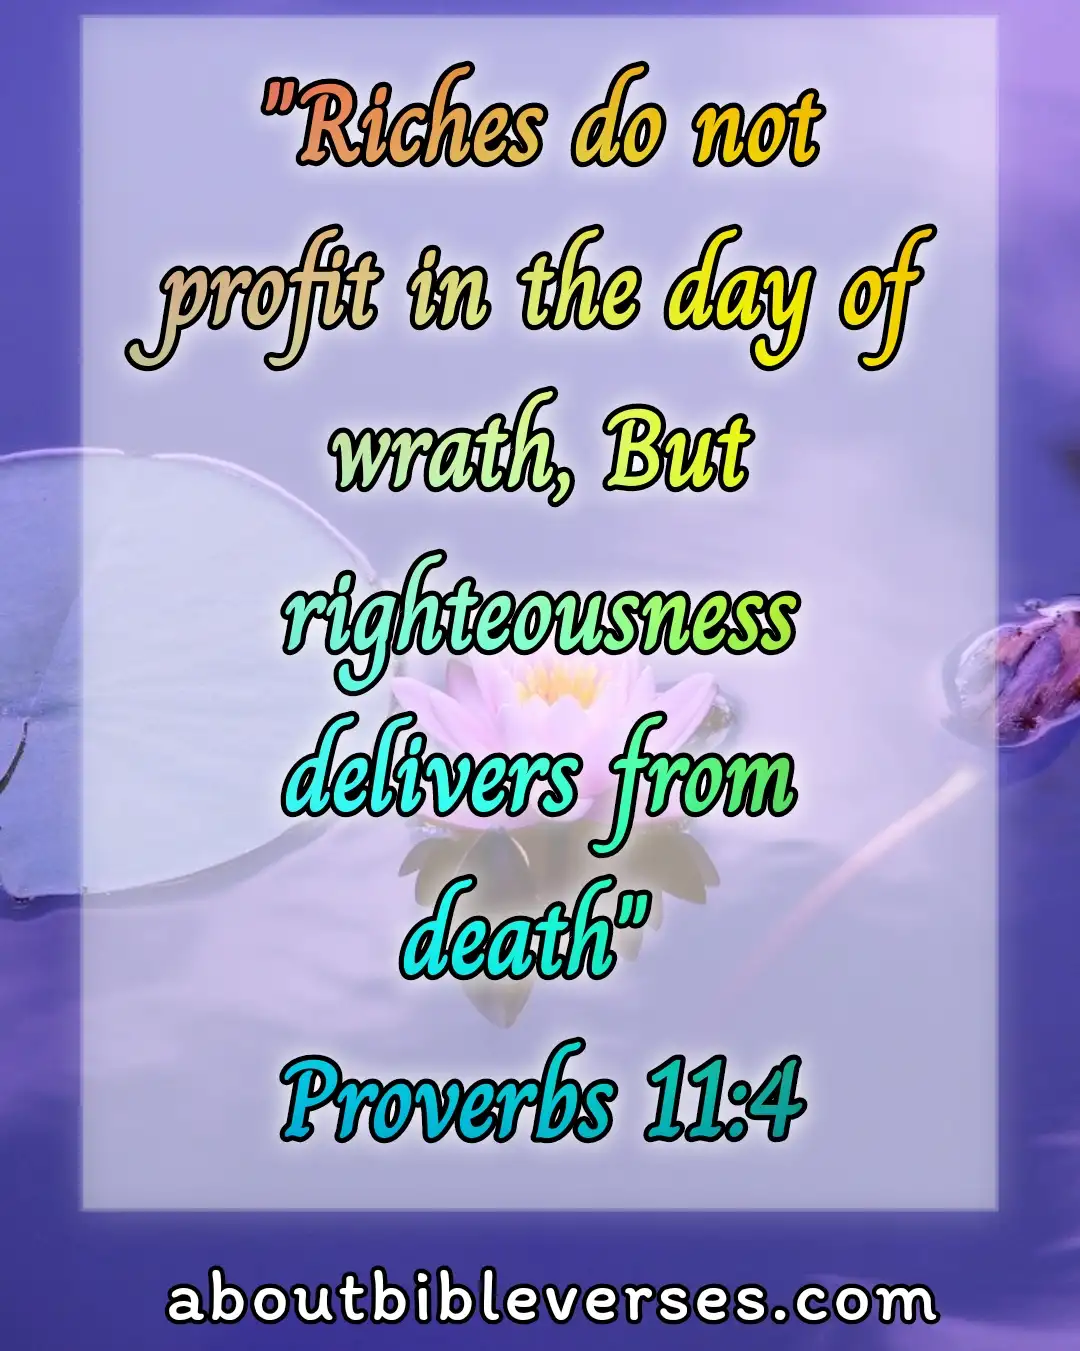 Bible Verses About Wealth And Prosperity (Proverbs 11:4)